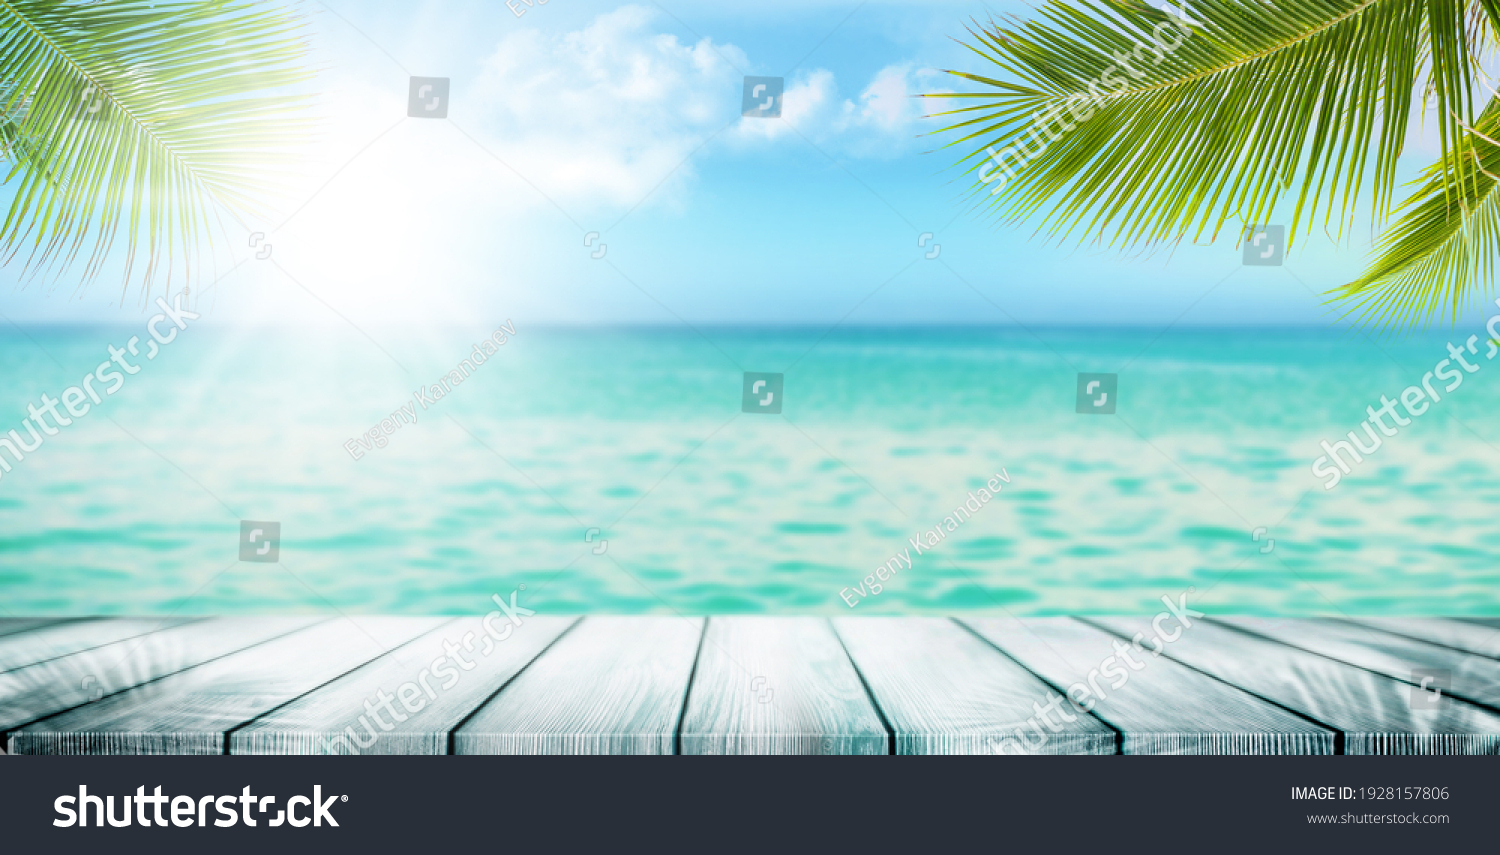 Summer tropical sea with waves, palm leaves and blue sky with clouds. Perfect vacation landscape with empty wooden table #1928157806